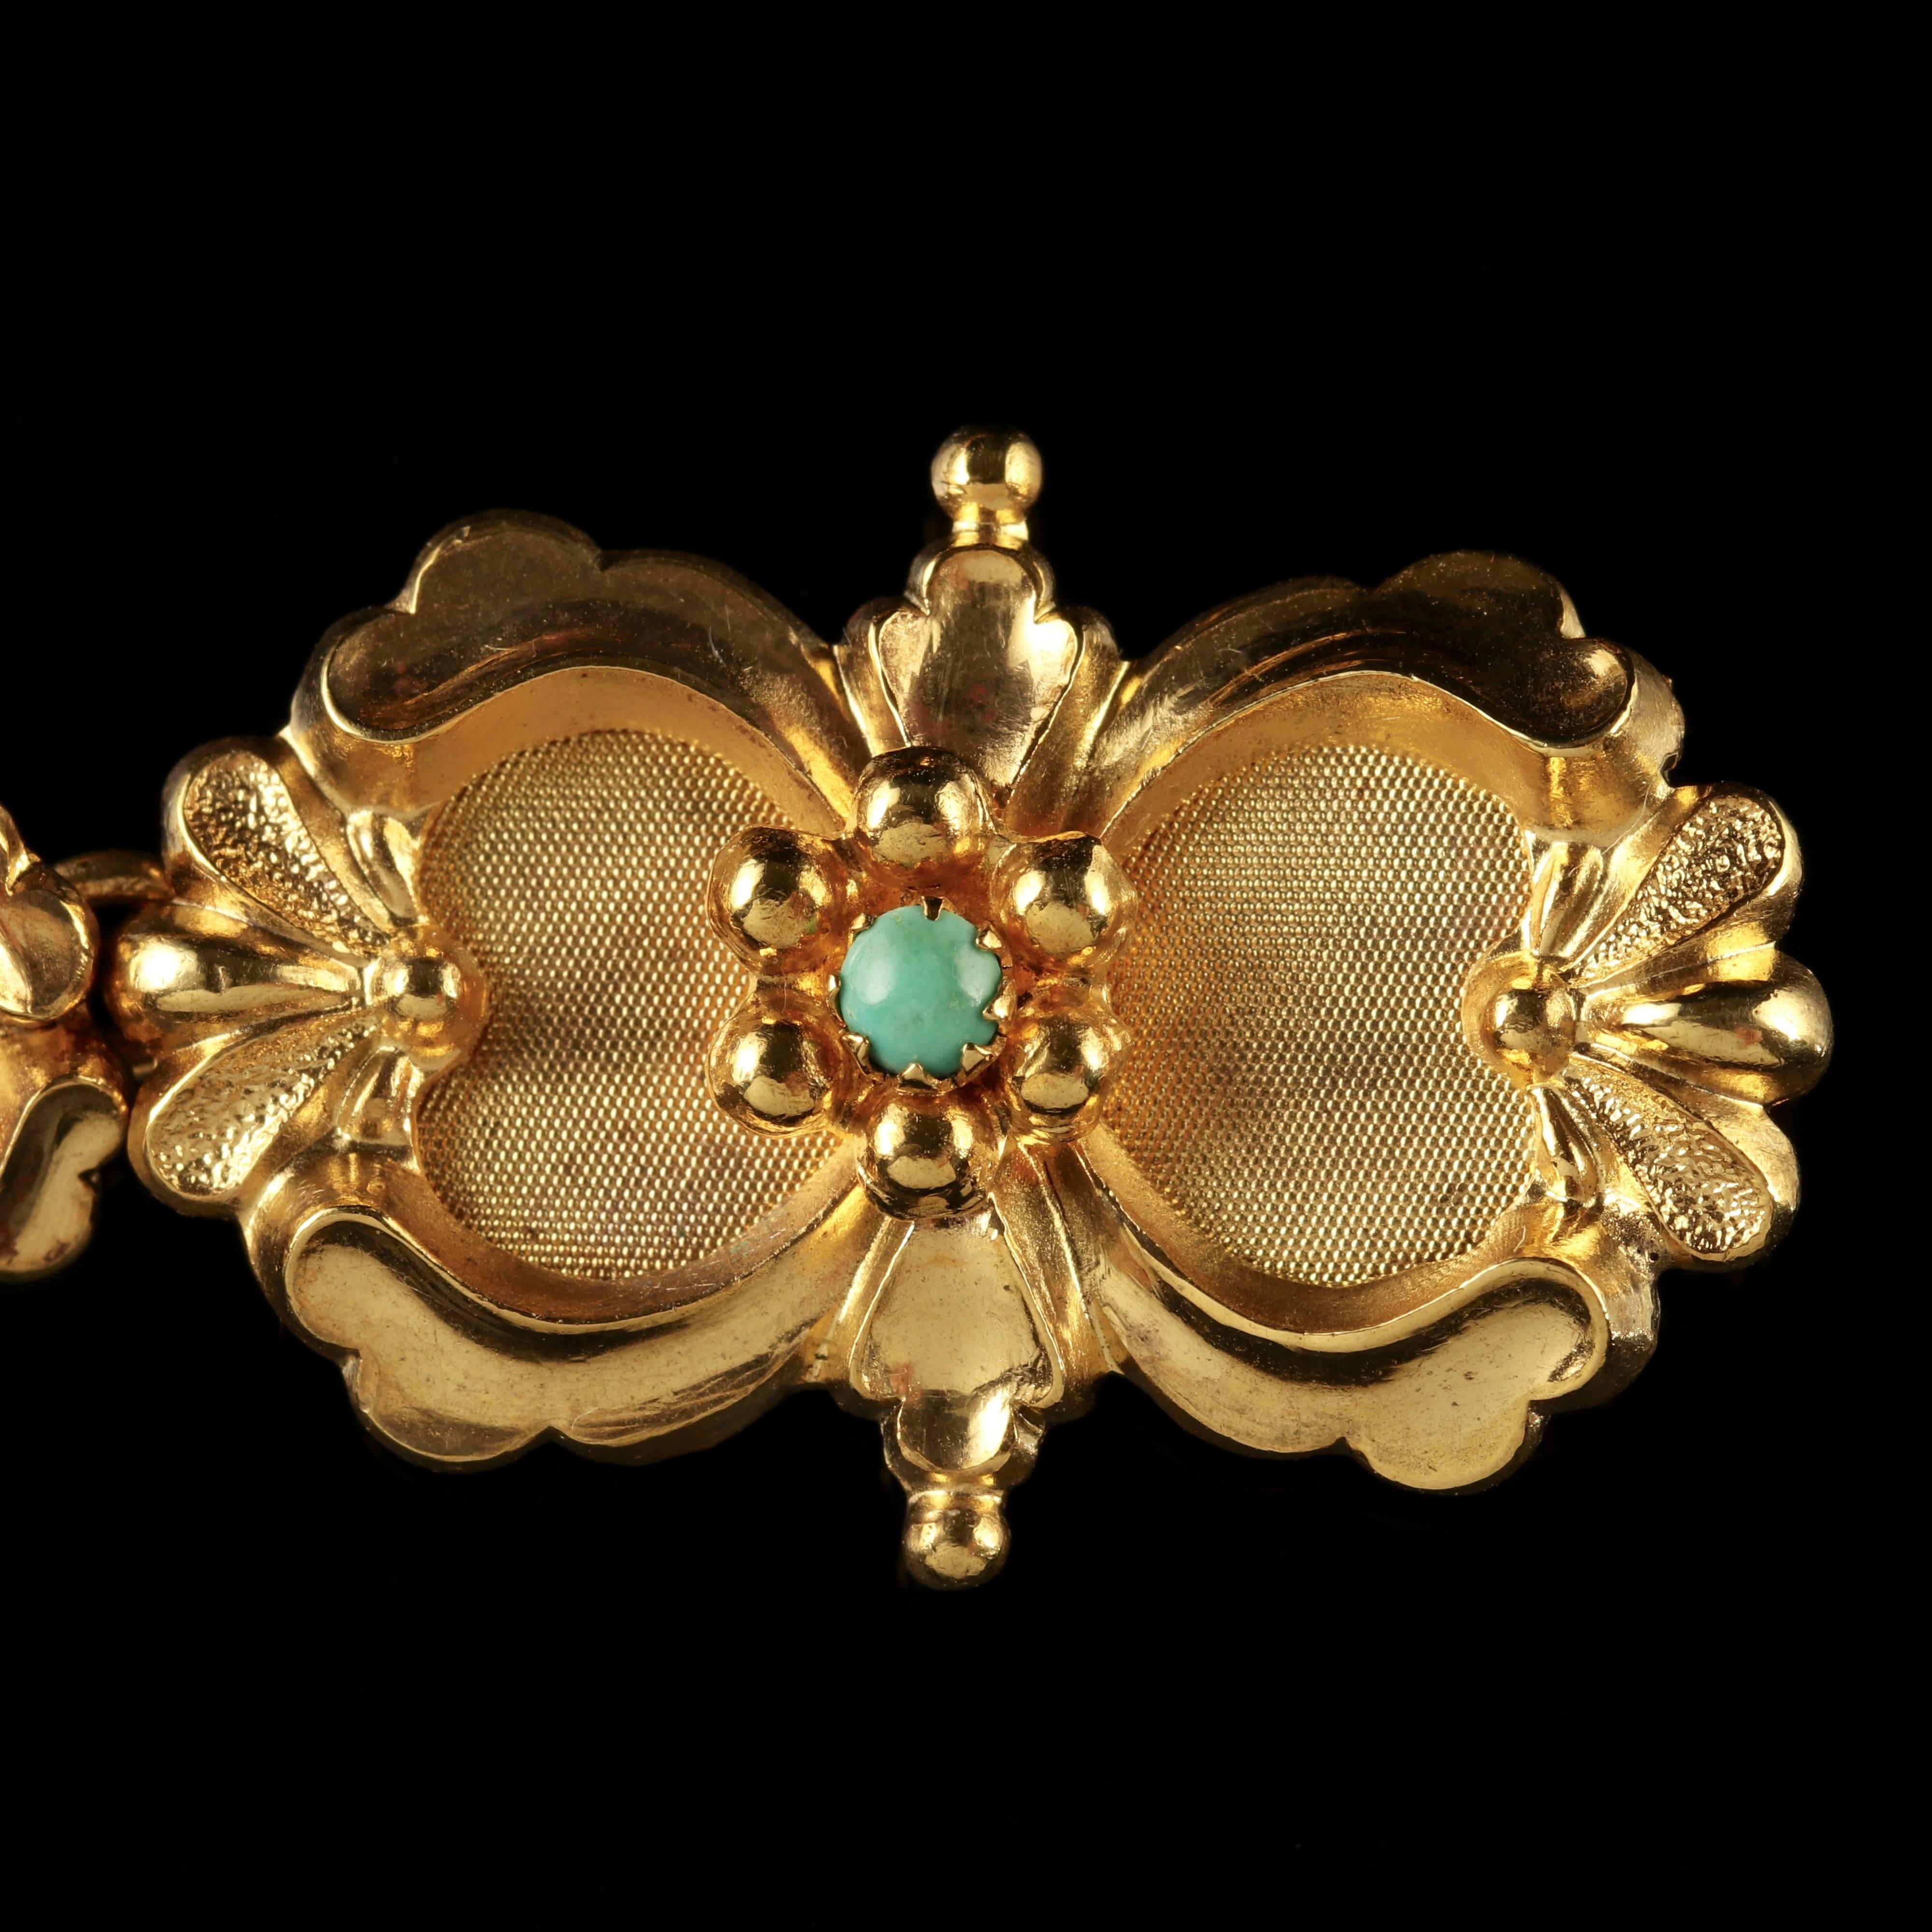 To read more please click continue reading below-

This fabulous antique Turquoise bracelet is set with beautiful Victorian workmanship from the 1880s.

Nine fabulous Turquoise stones adorn each link of this lovely bracelet including the large